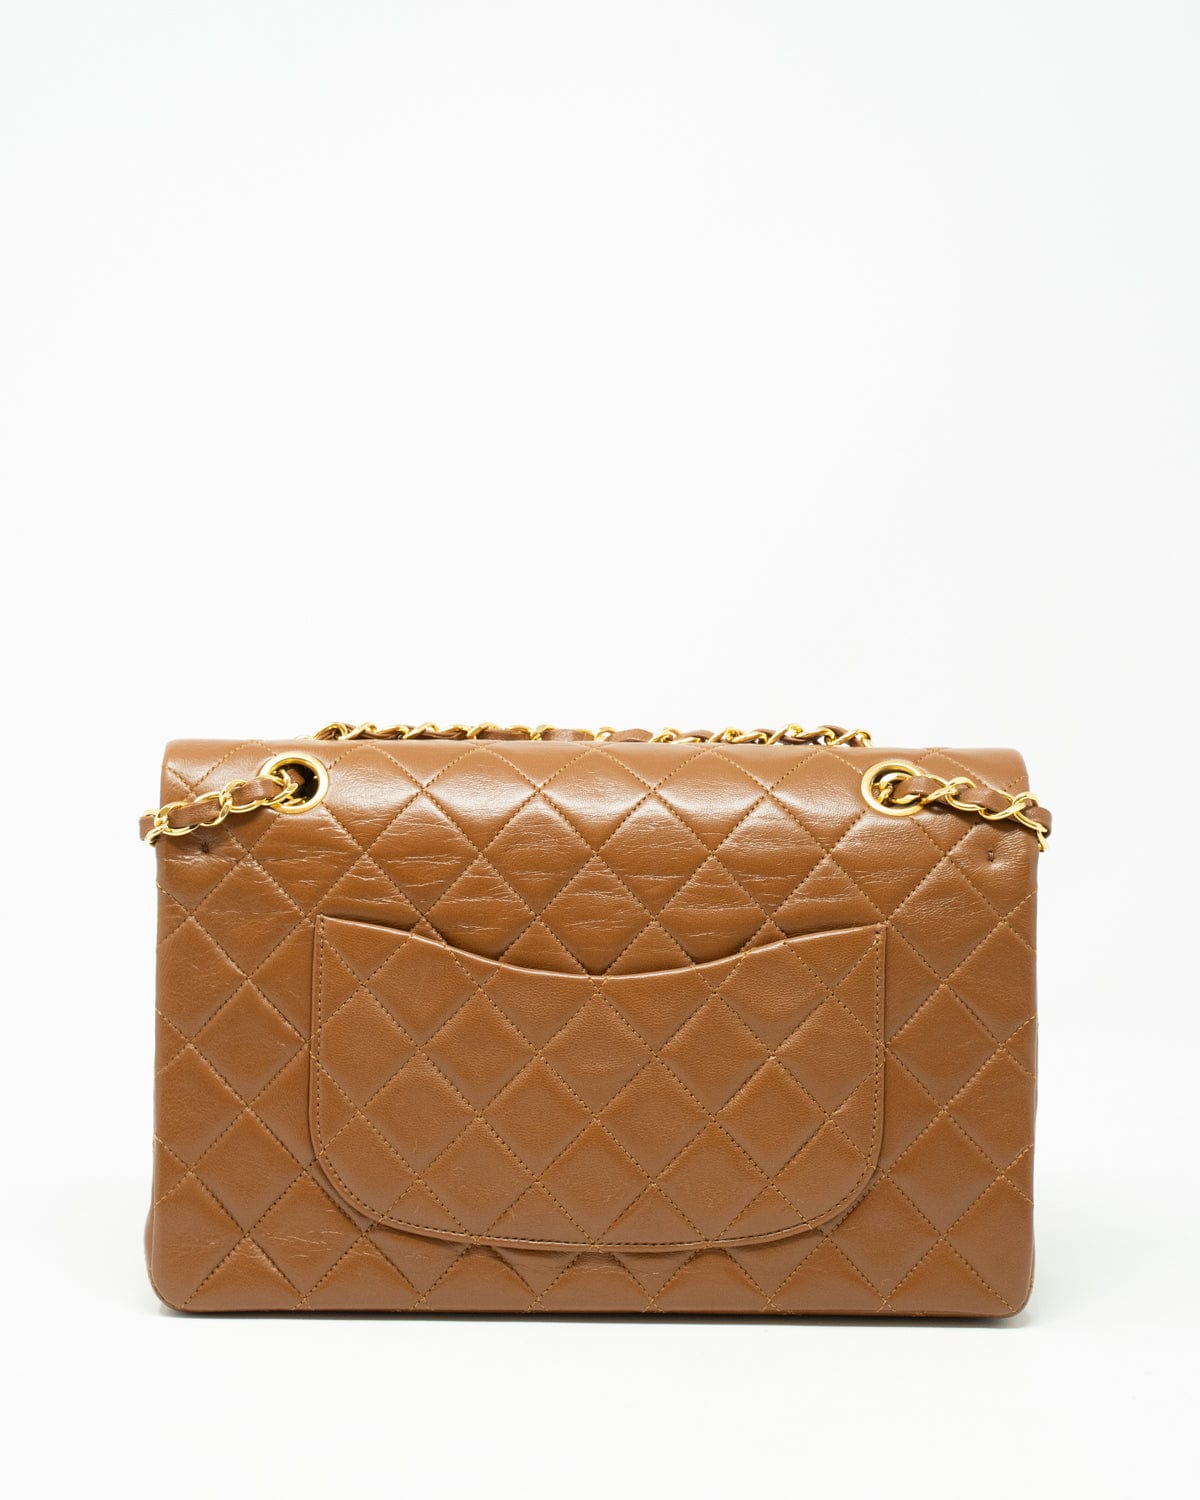 Chanel Chanel medium classic flap in caramel with 24k gold gilded hardware. ASL3390